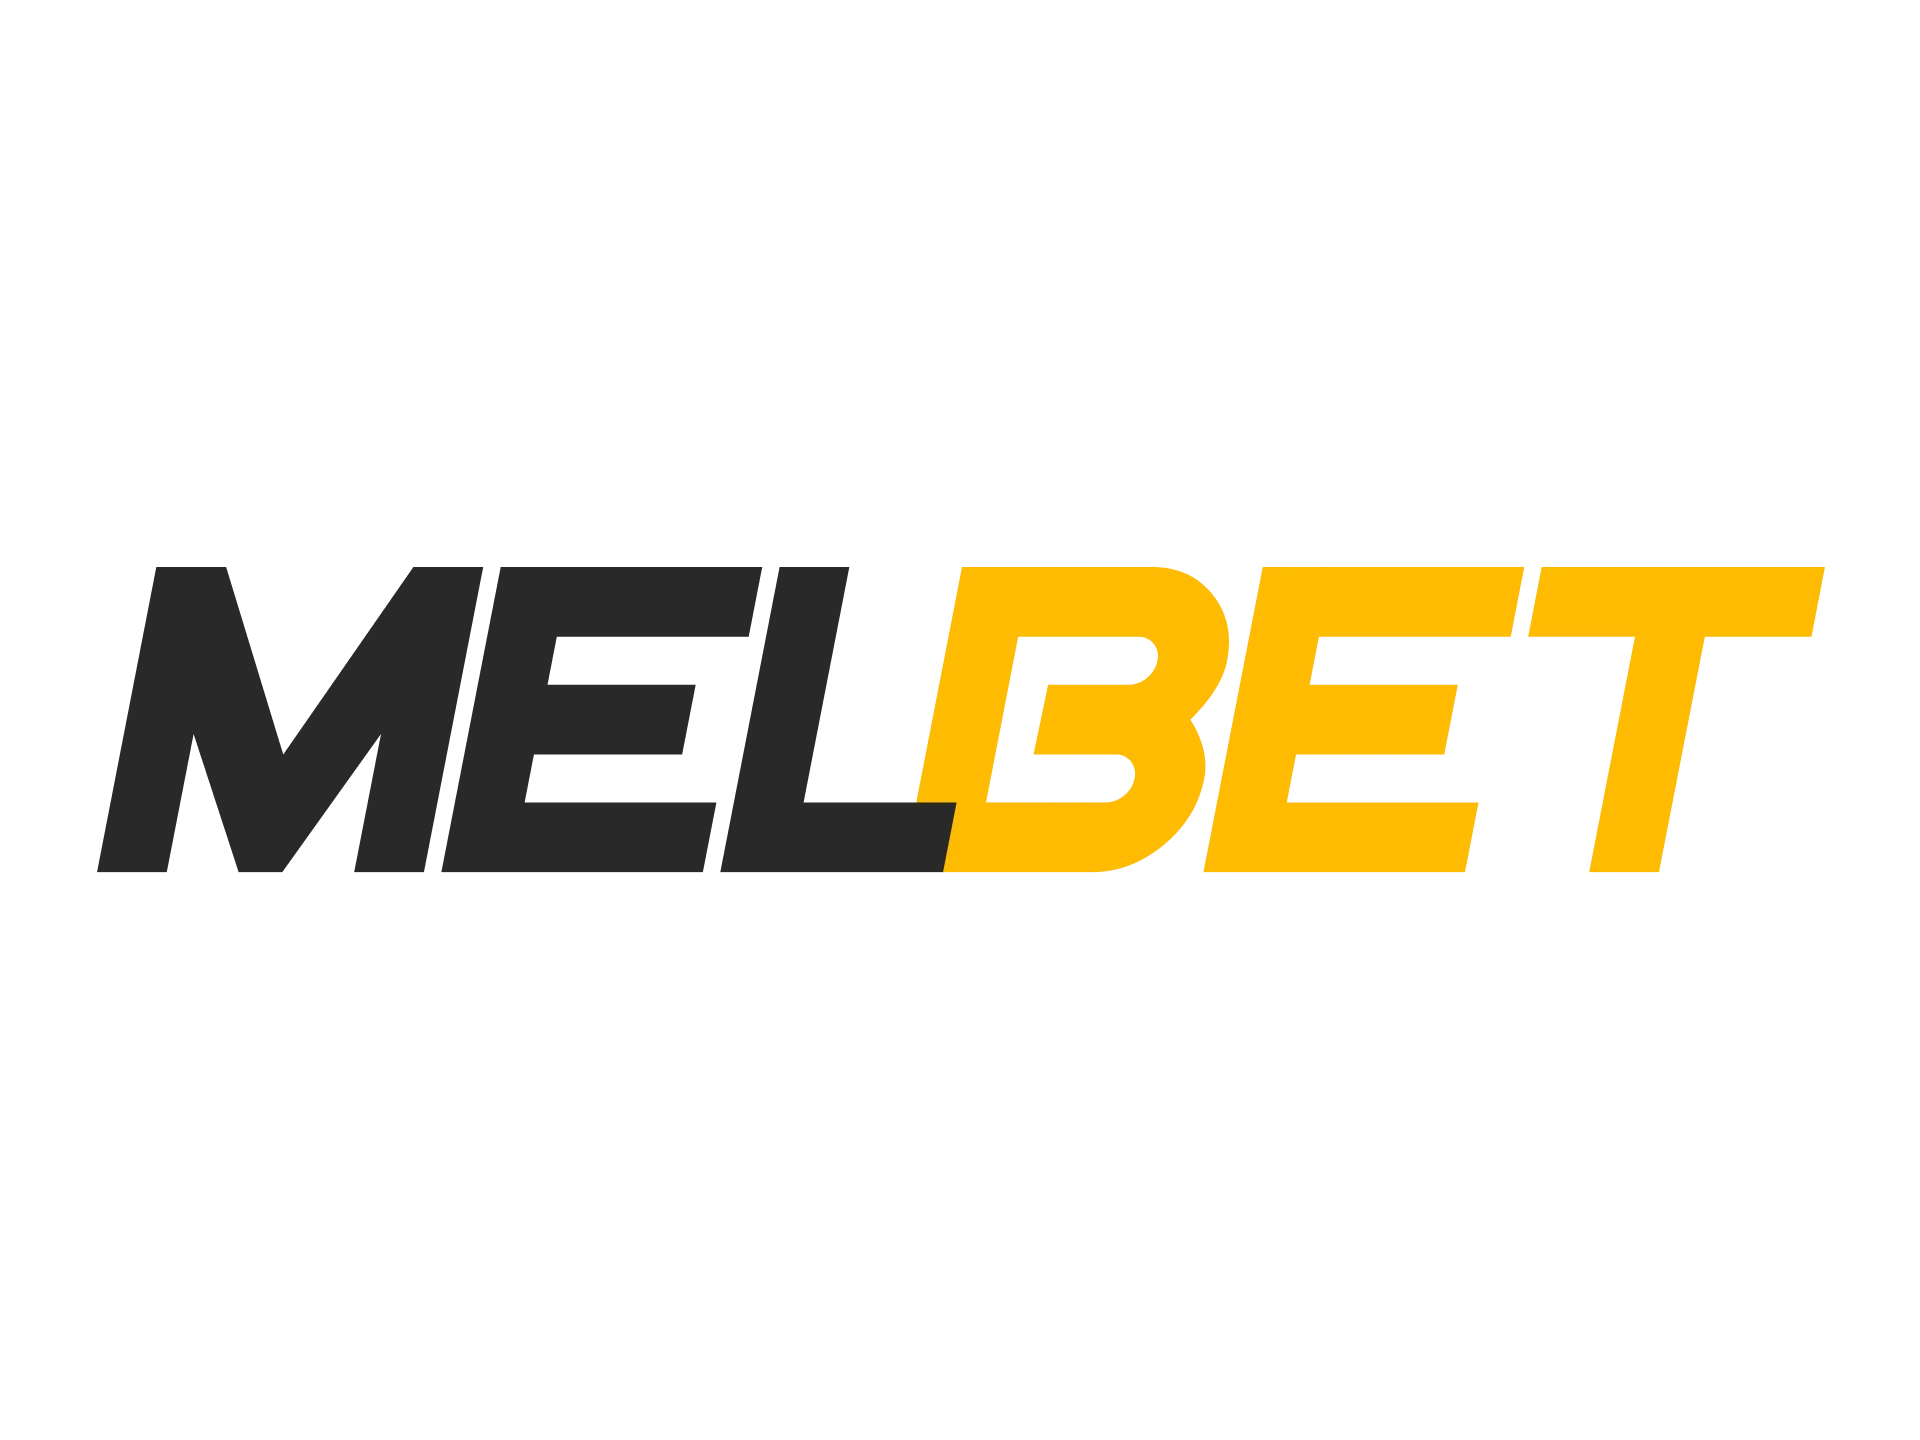 You can bet on cricket at Melbet.